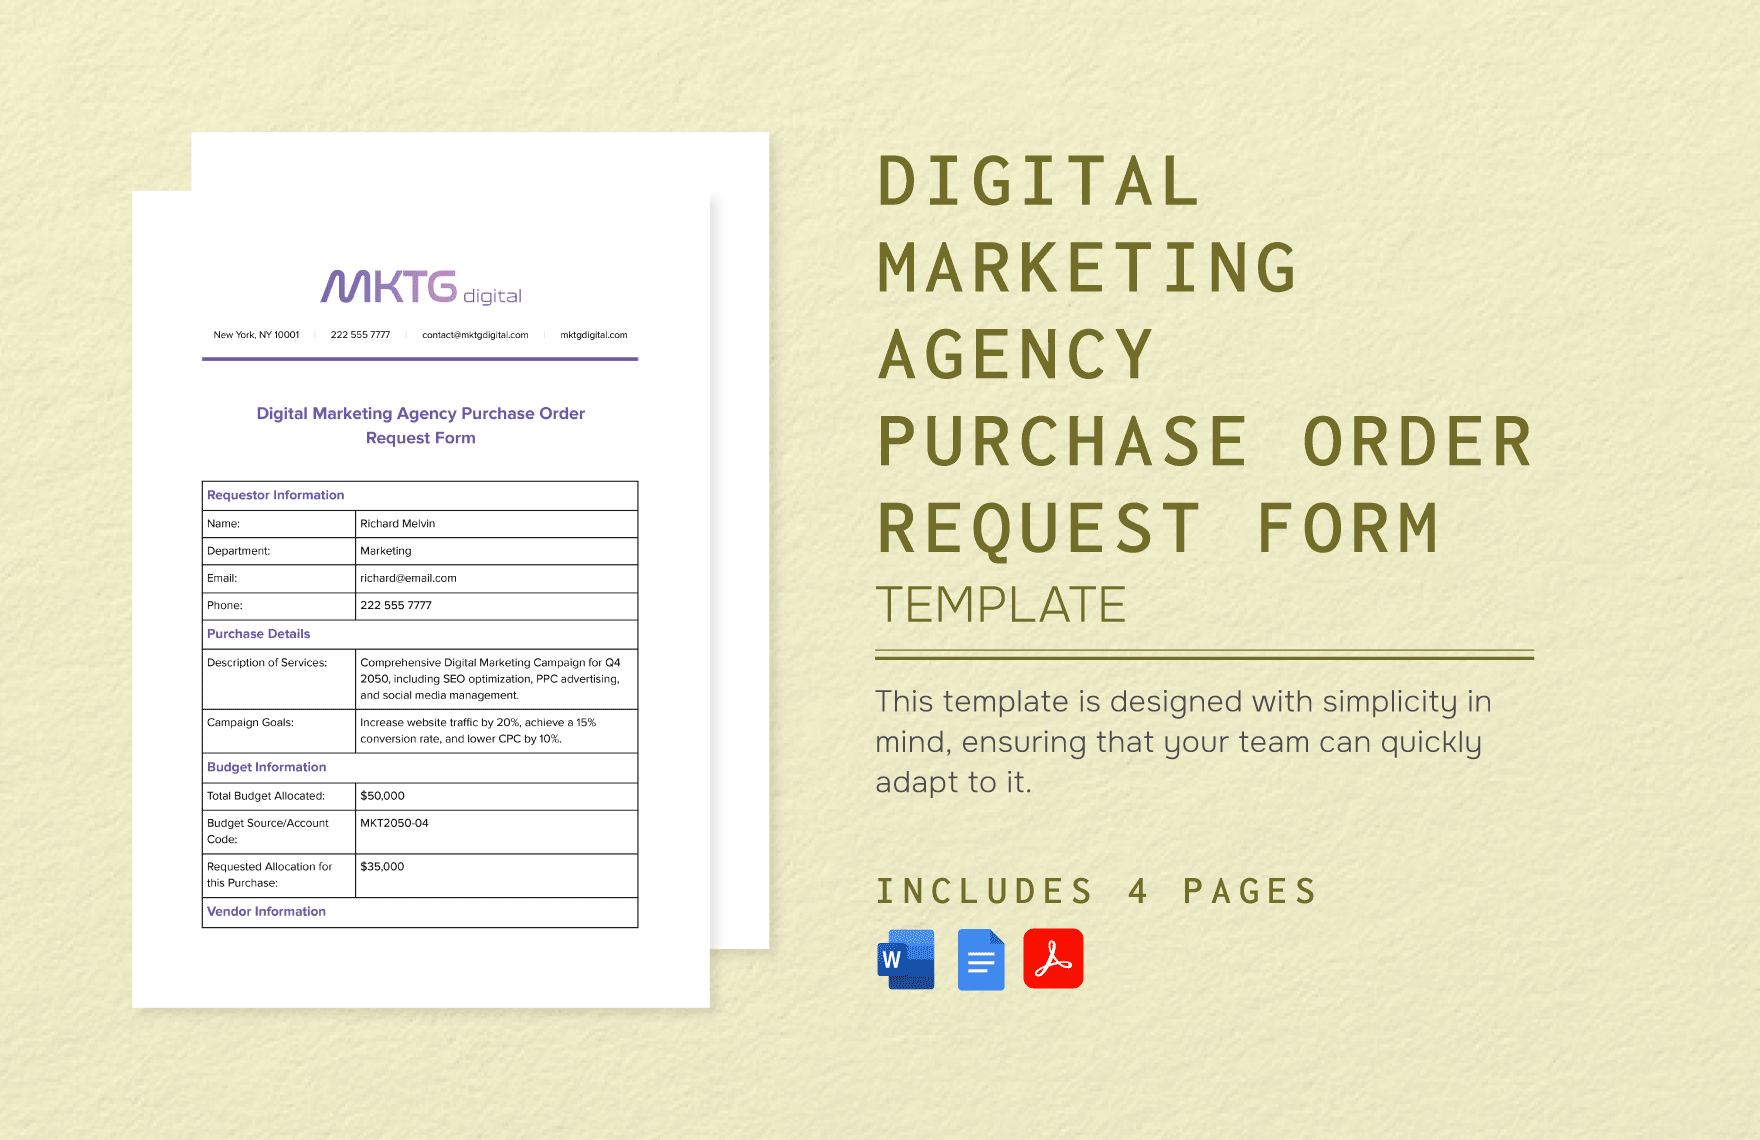 Digital Marketing Agency Purchase Order Request Form Template